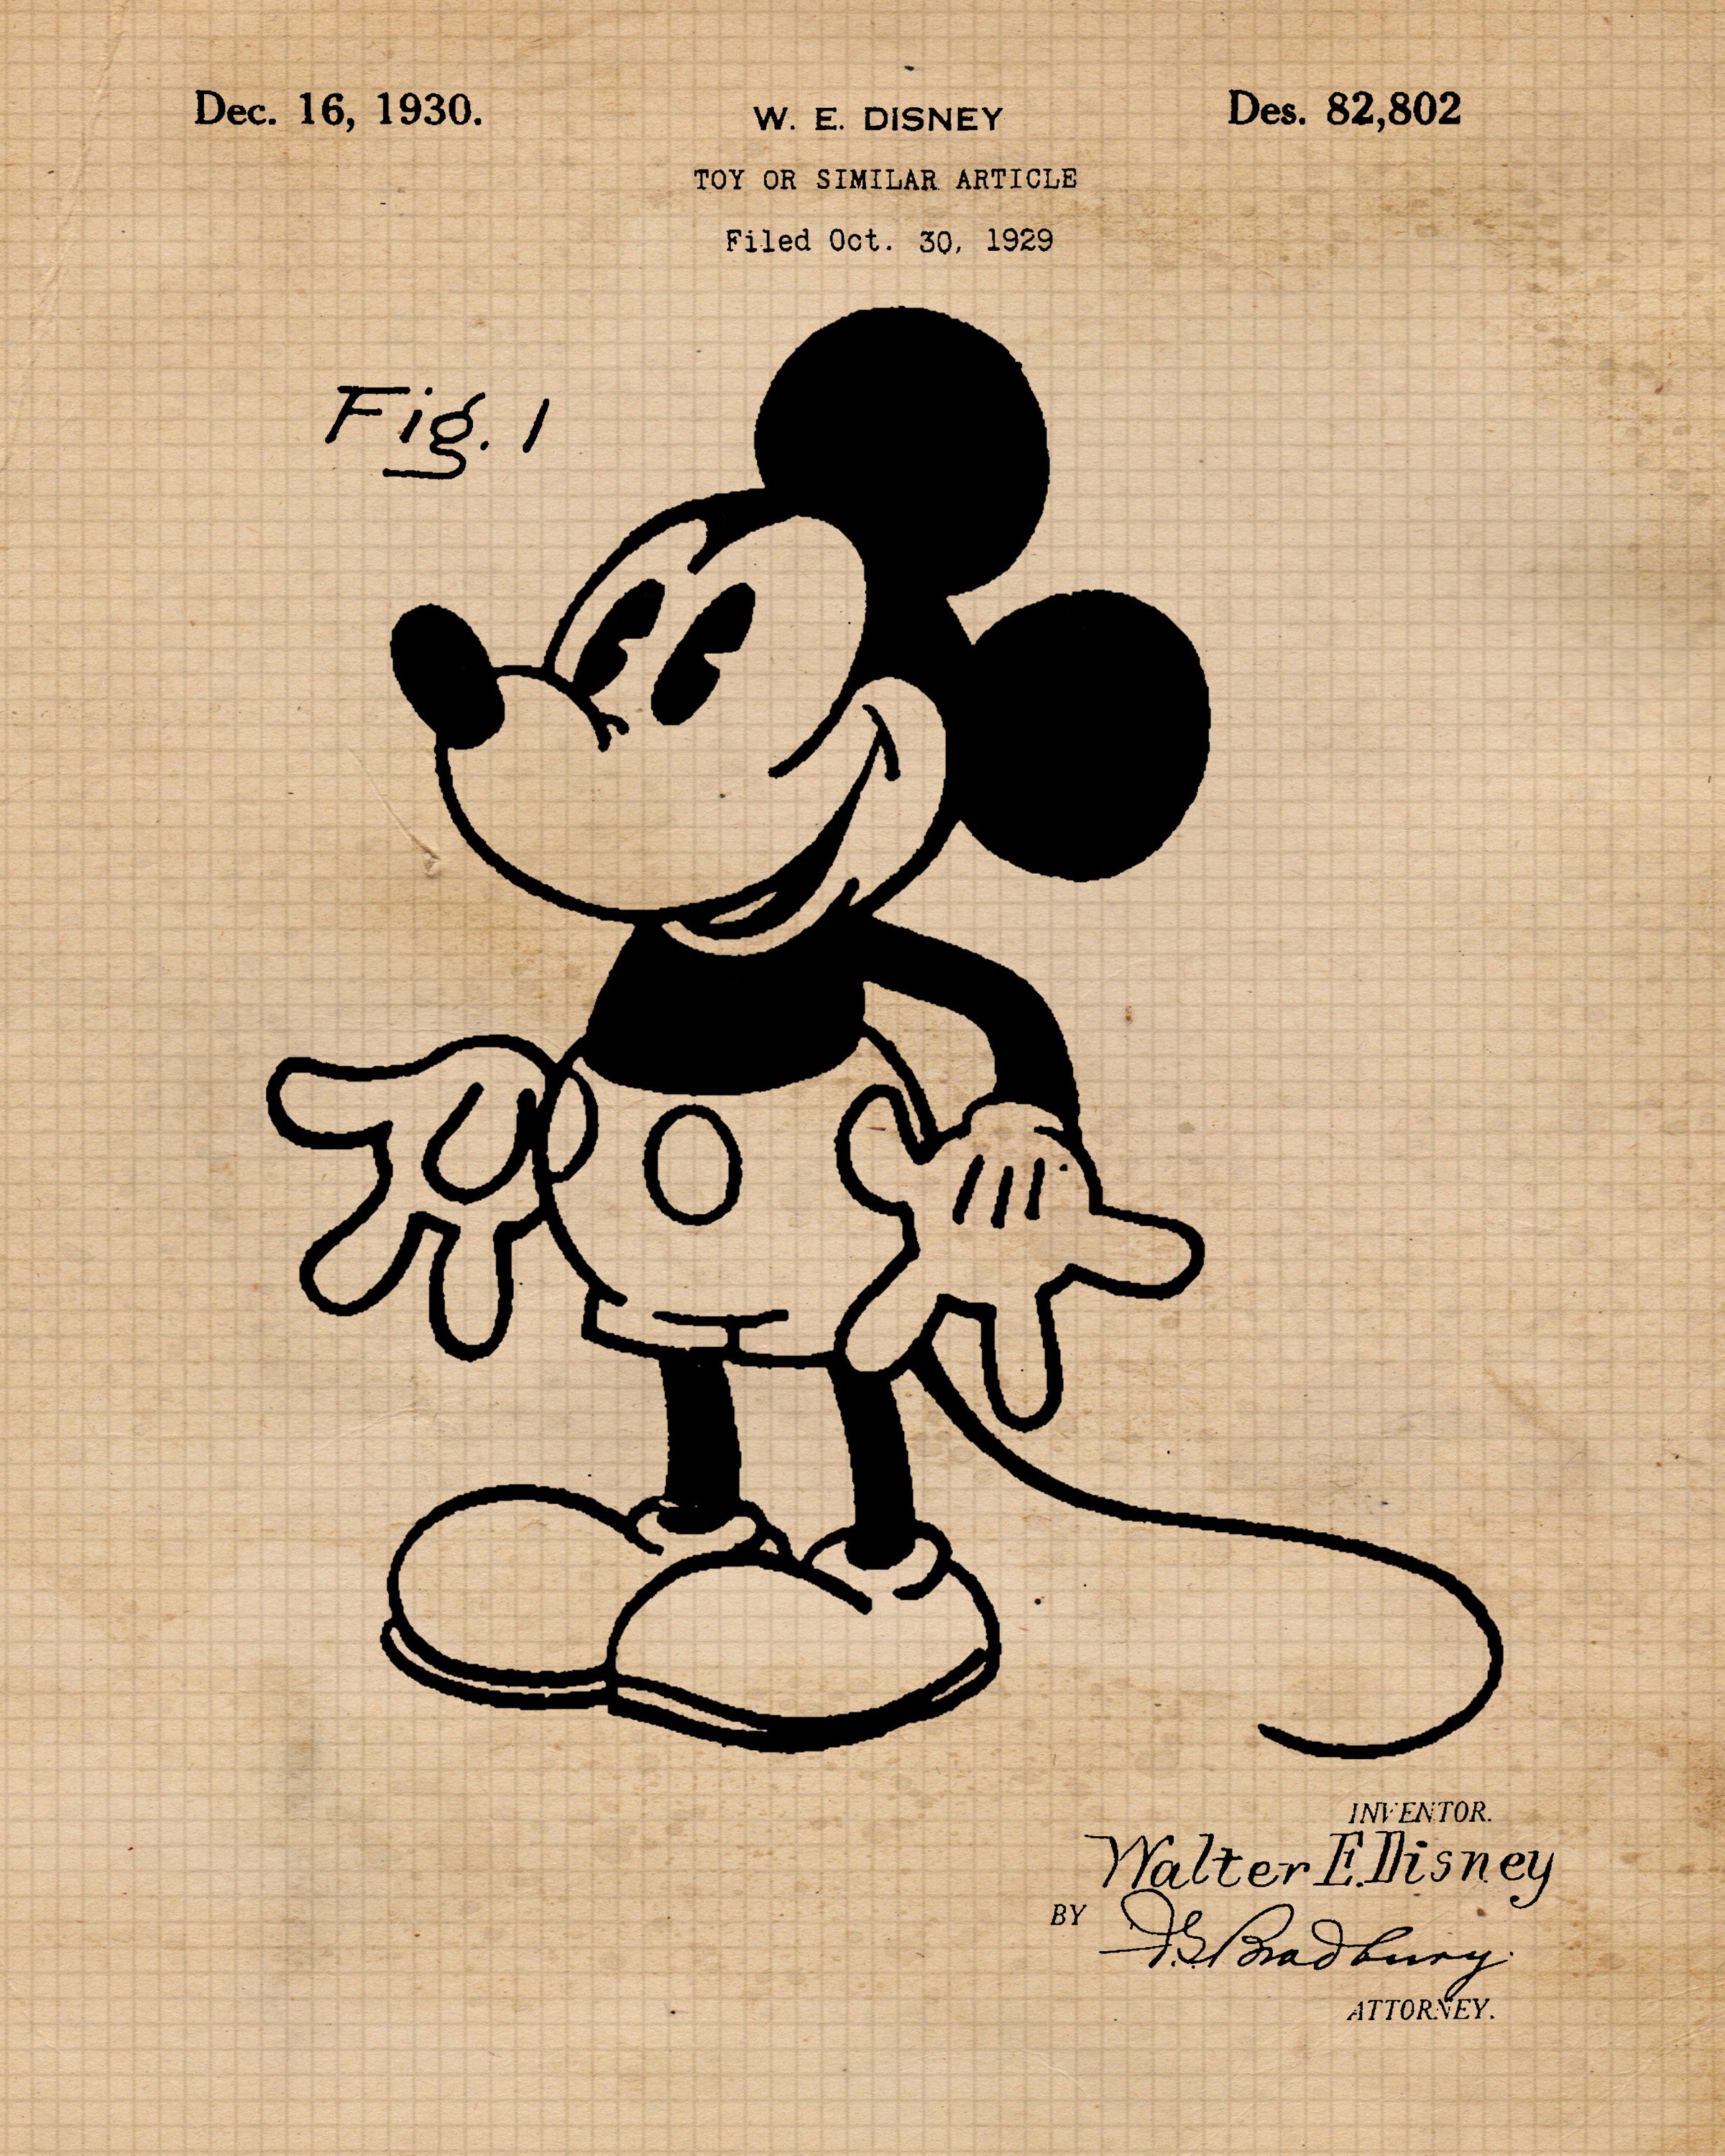 Vintage Mickey Mouse Patent Prints 4 Unframed Photos Wall - Etsy 日本